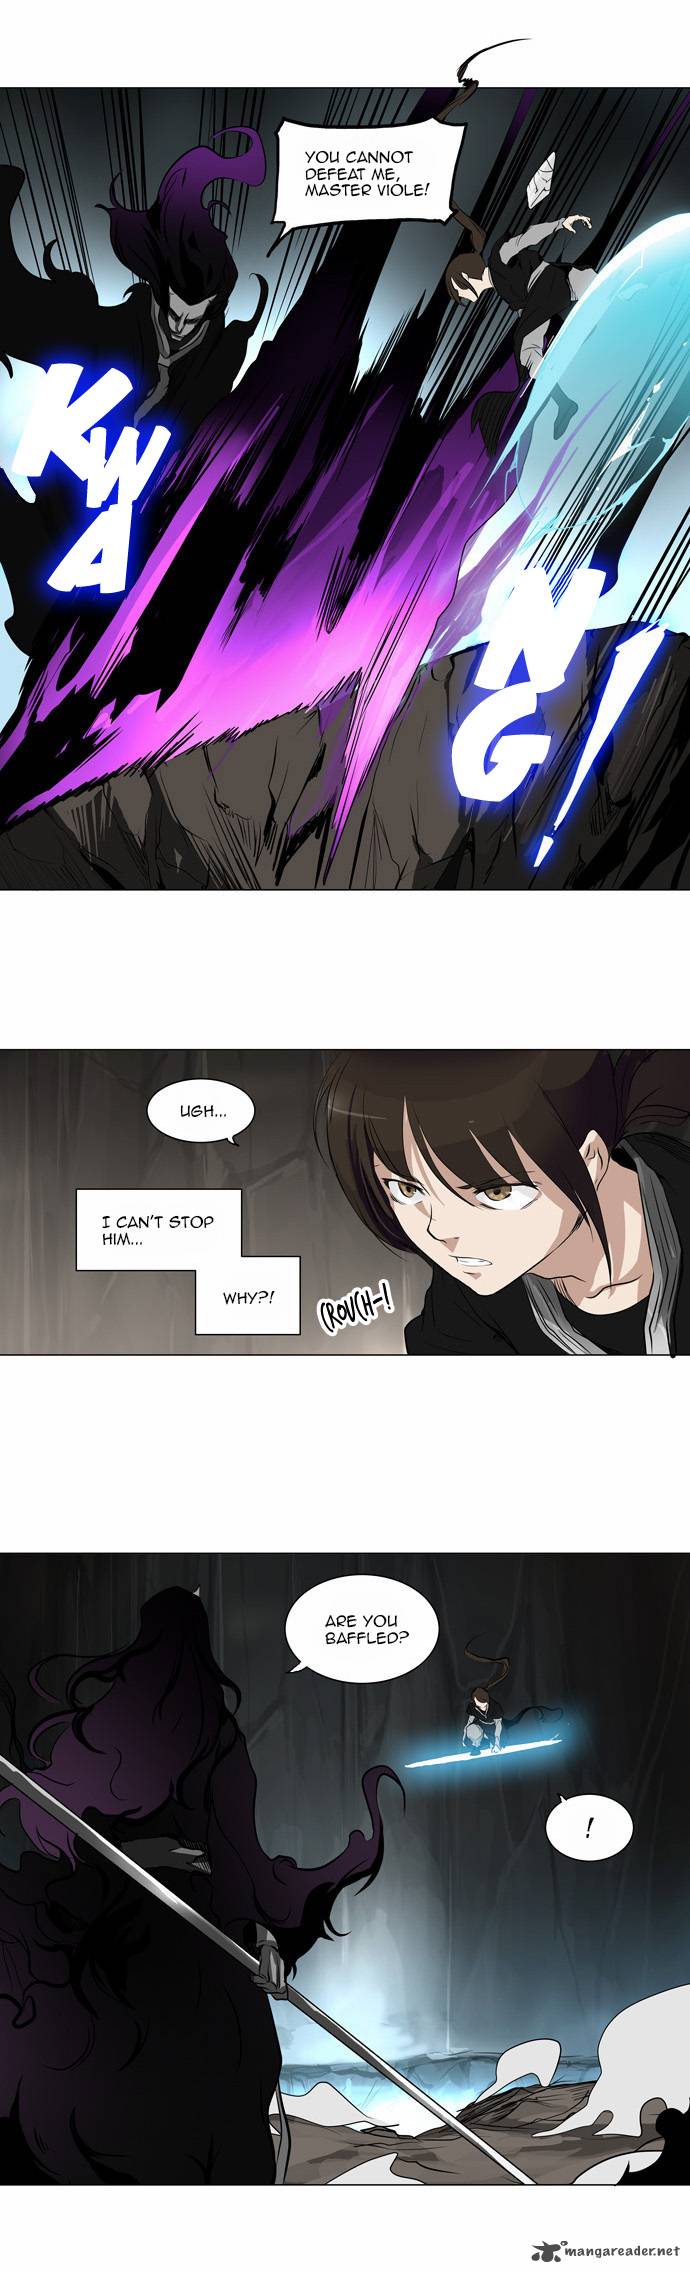 Tower Of God 181 11